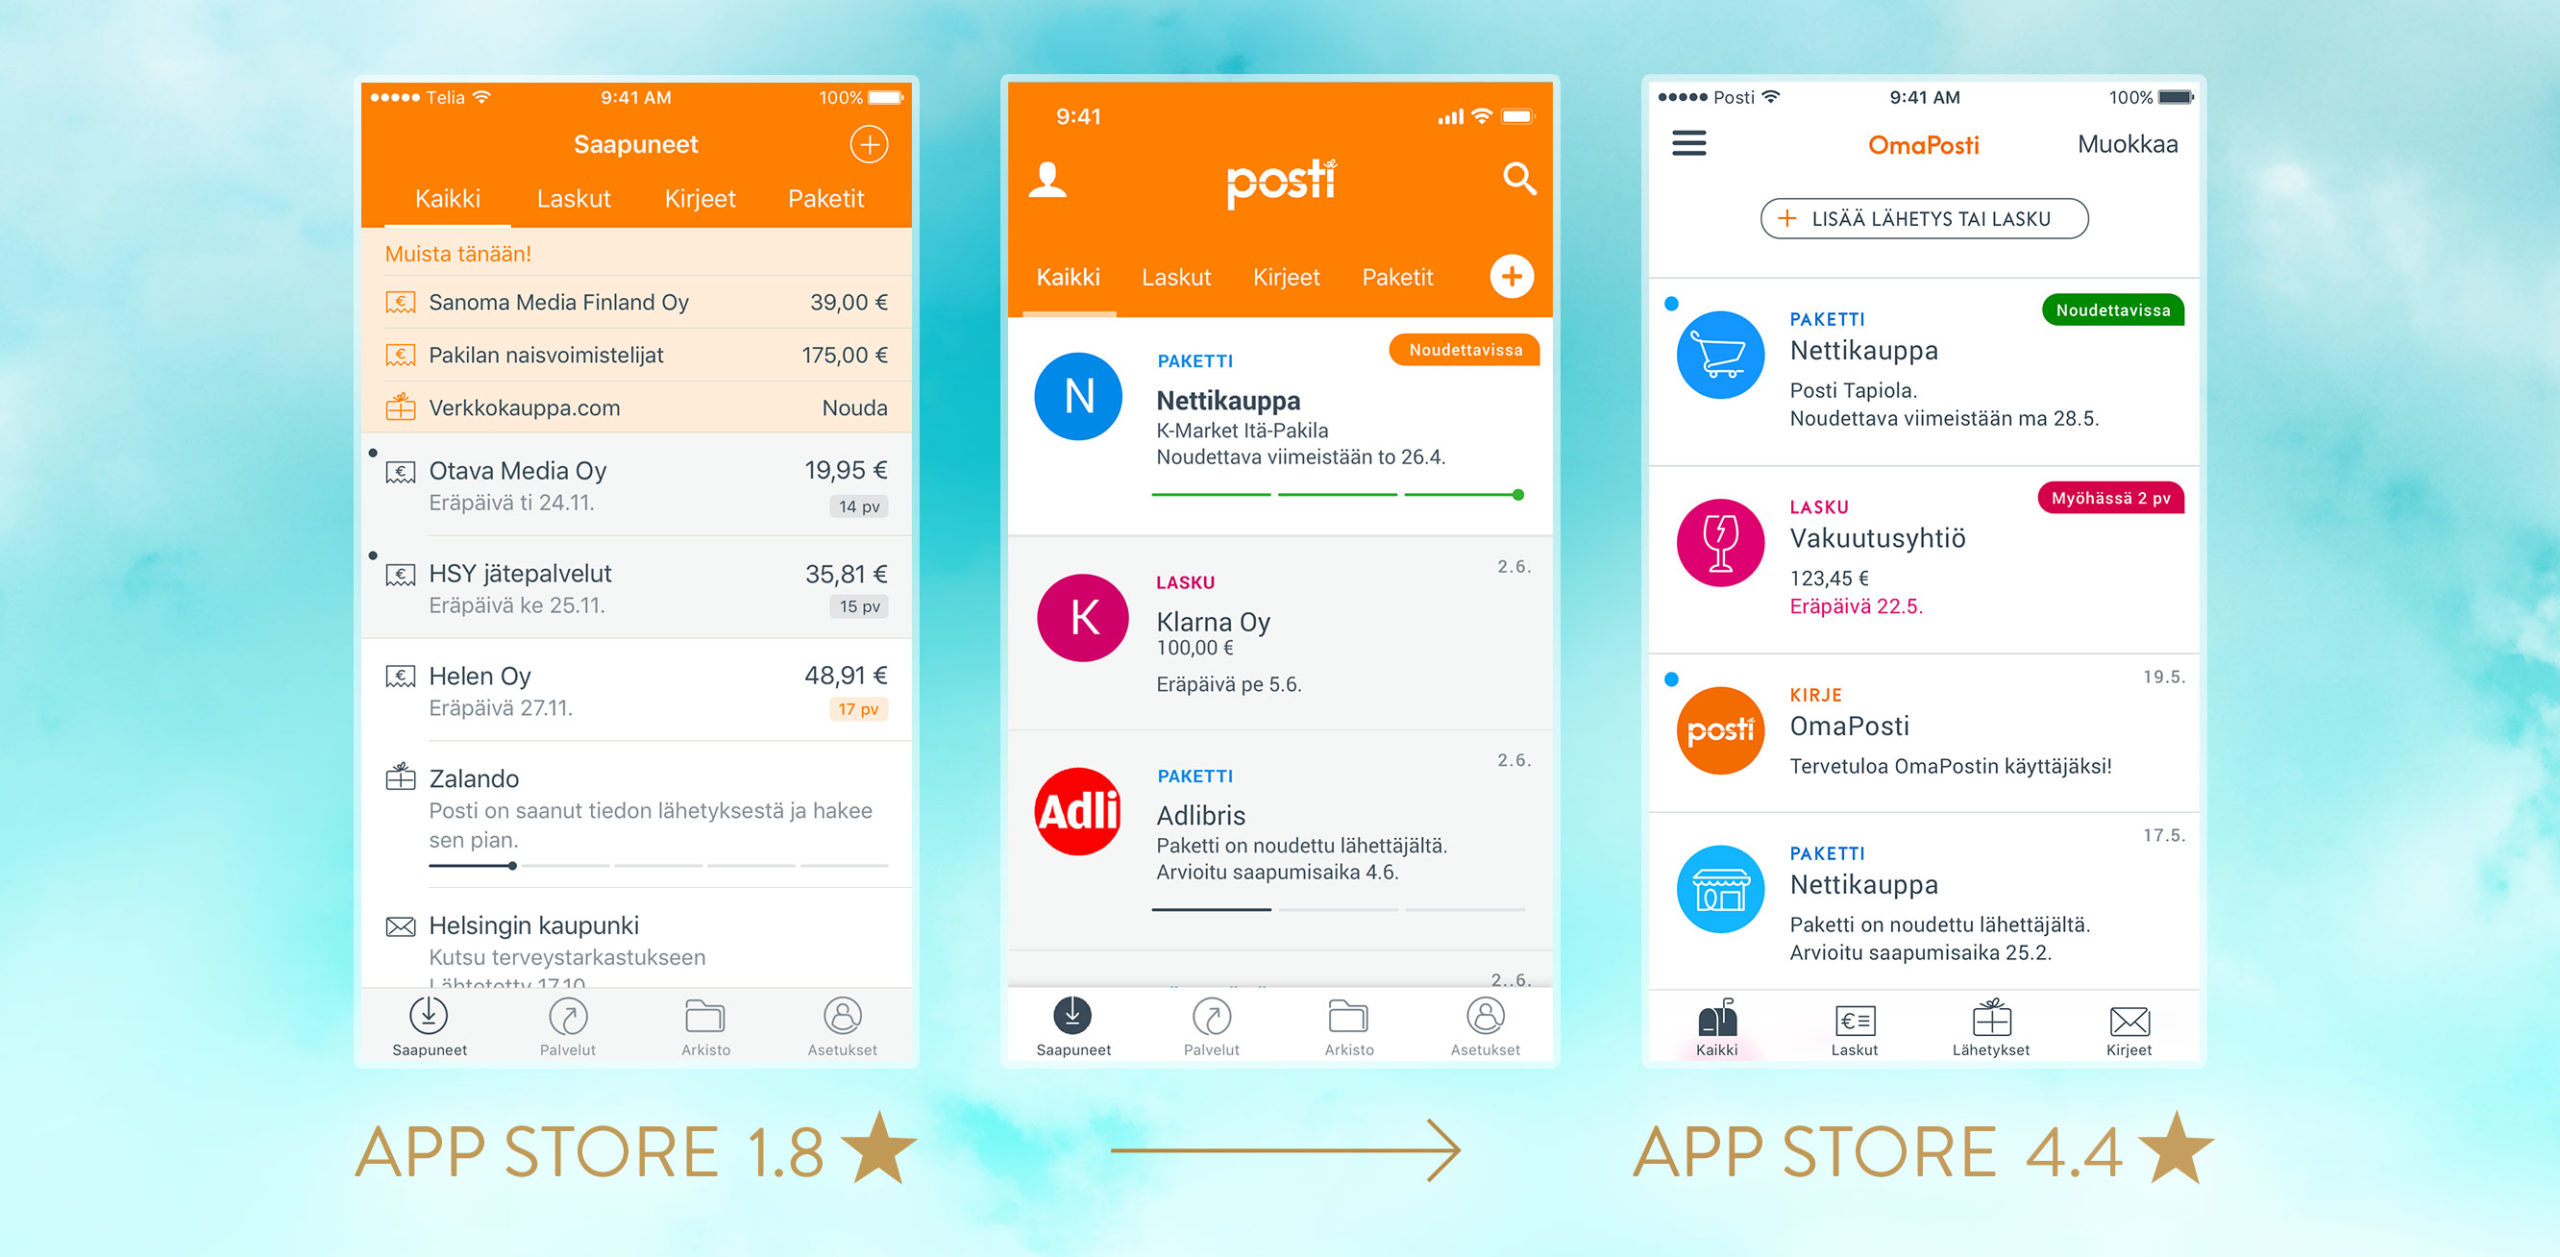 OmaPosti design evolution - After redesign App Store rating increased from 1.8 to 4.4.